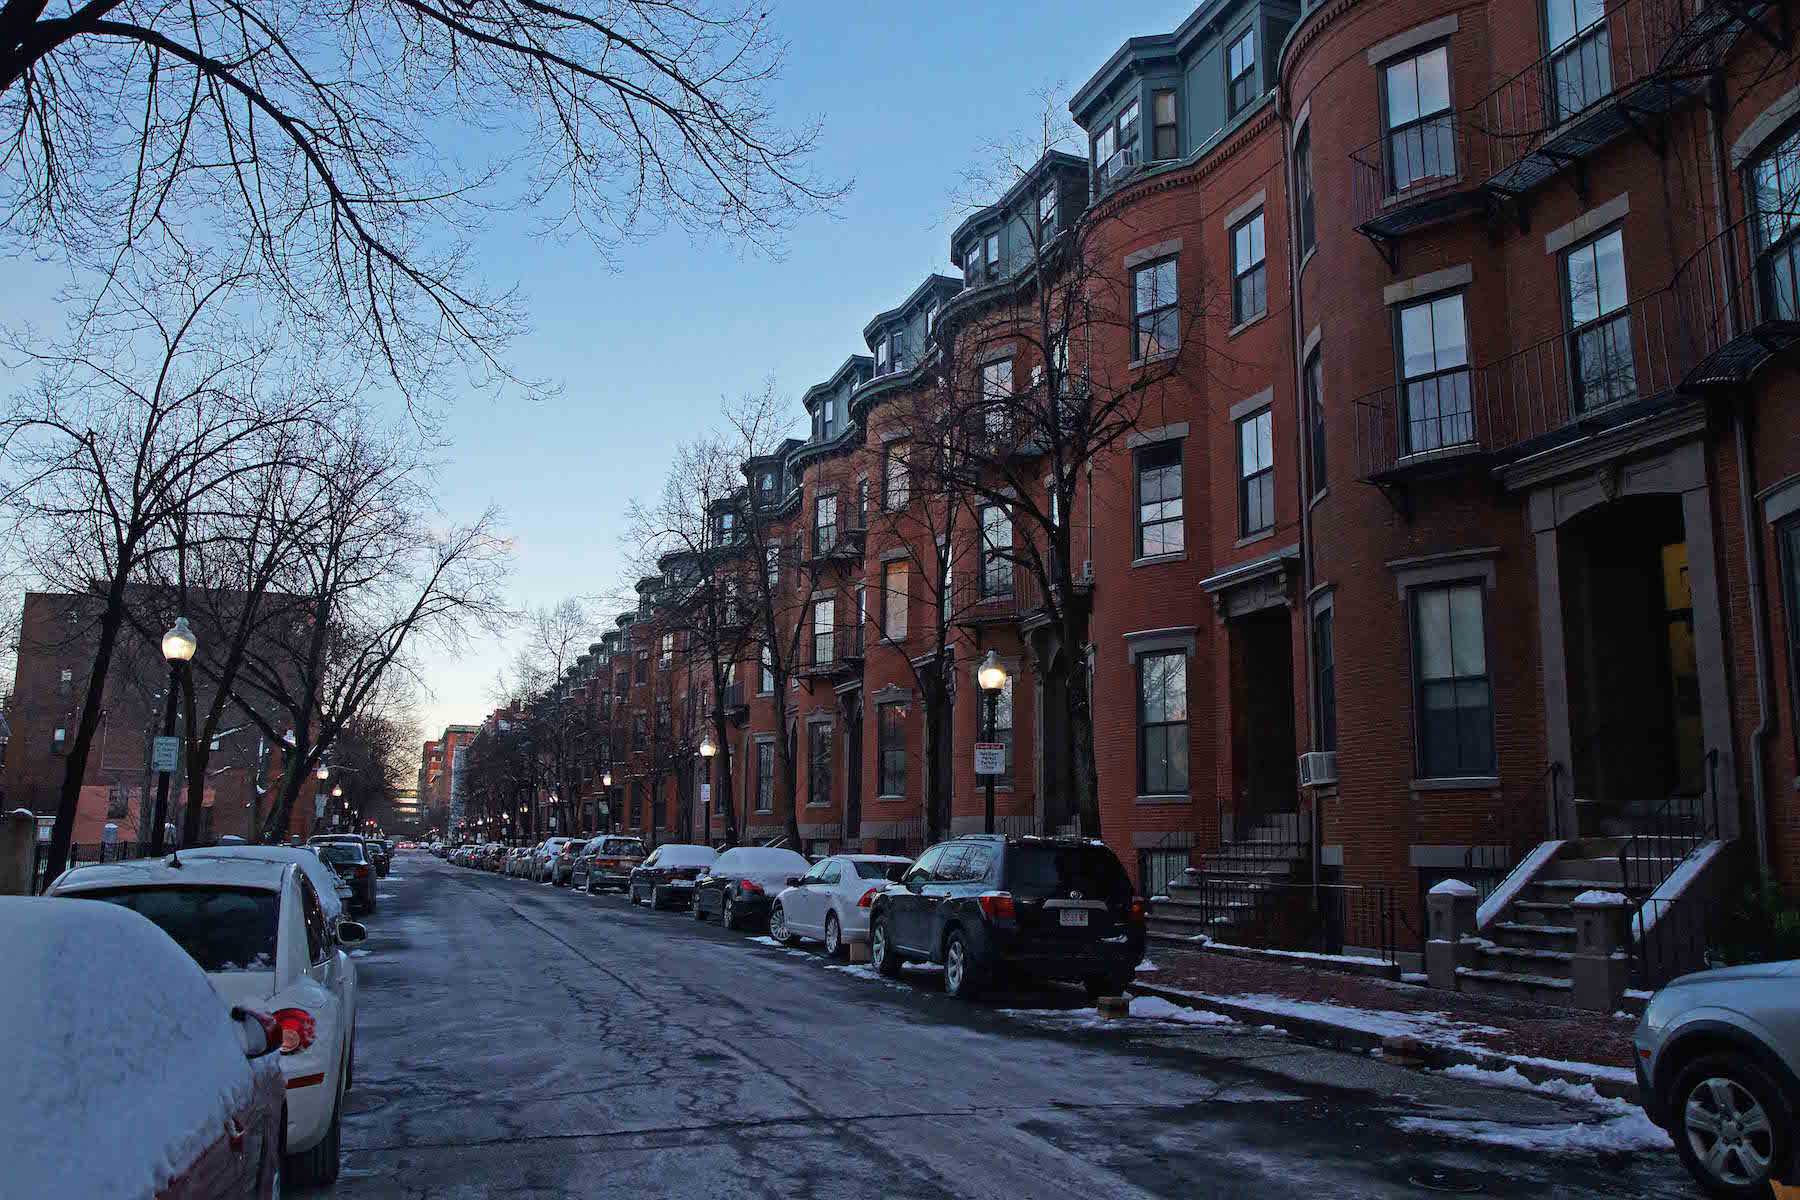 A photo of low-income housing in Boston.